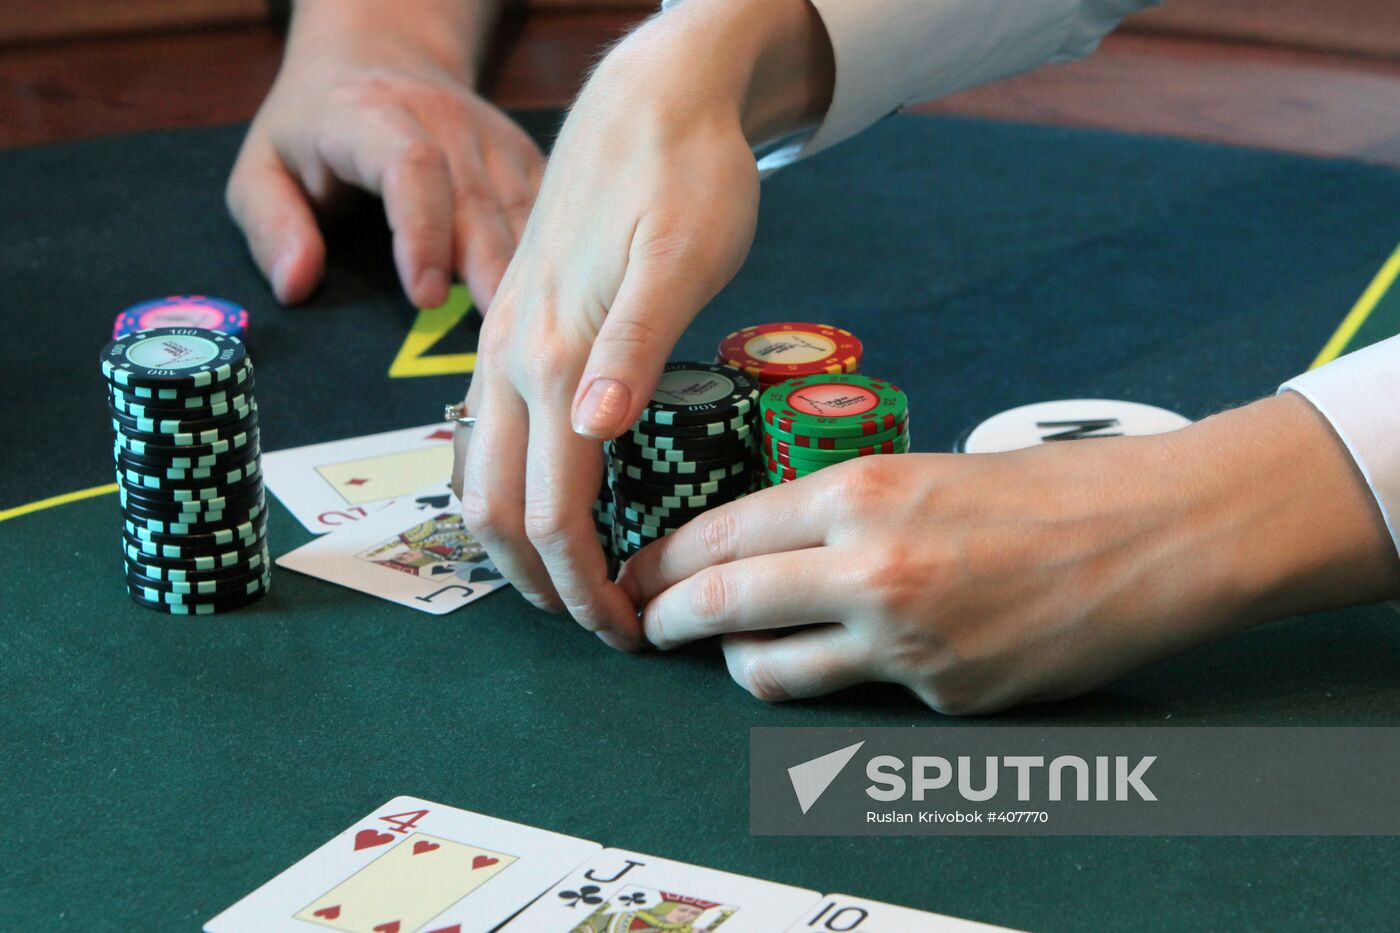 Sports poker at the PokerMoscow school